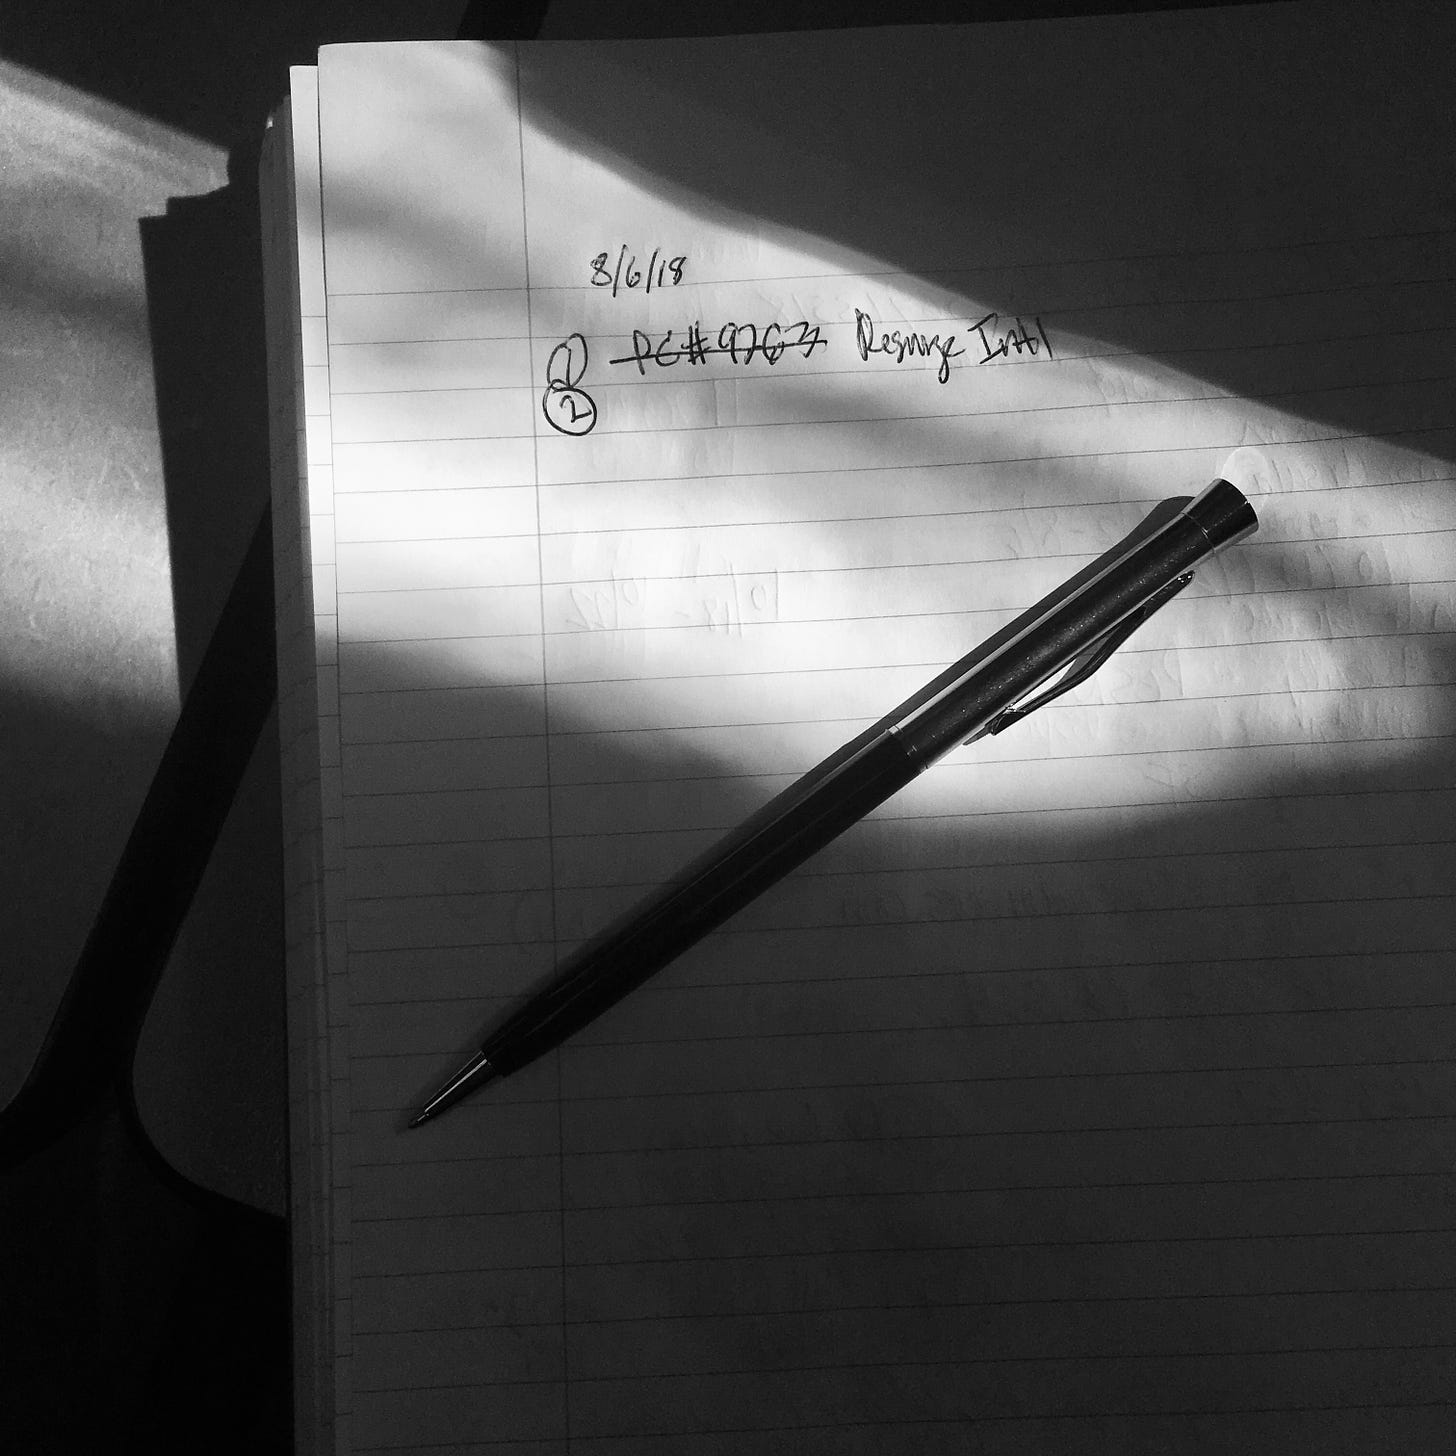 Close-up photo of a pen and notebook with a ray of light across the  frame. The notebook has a handwritten notes with the date 3/16/18  and scribbles of numbers and letters.